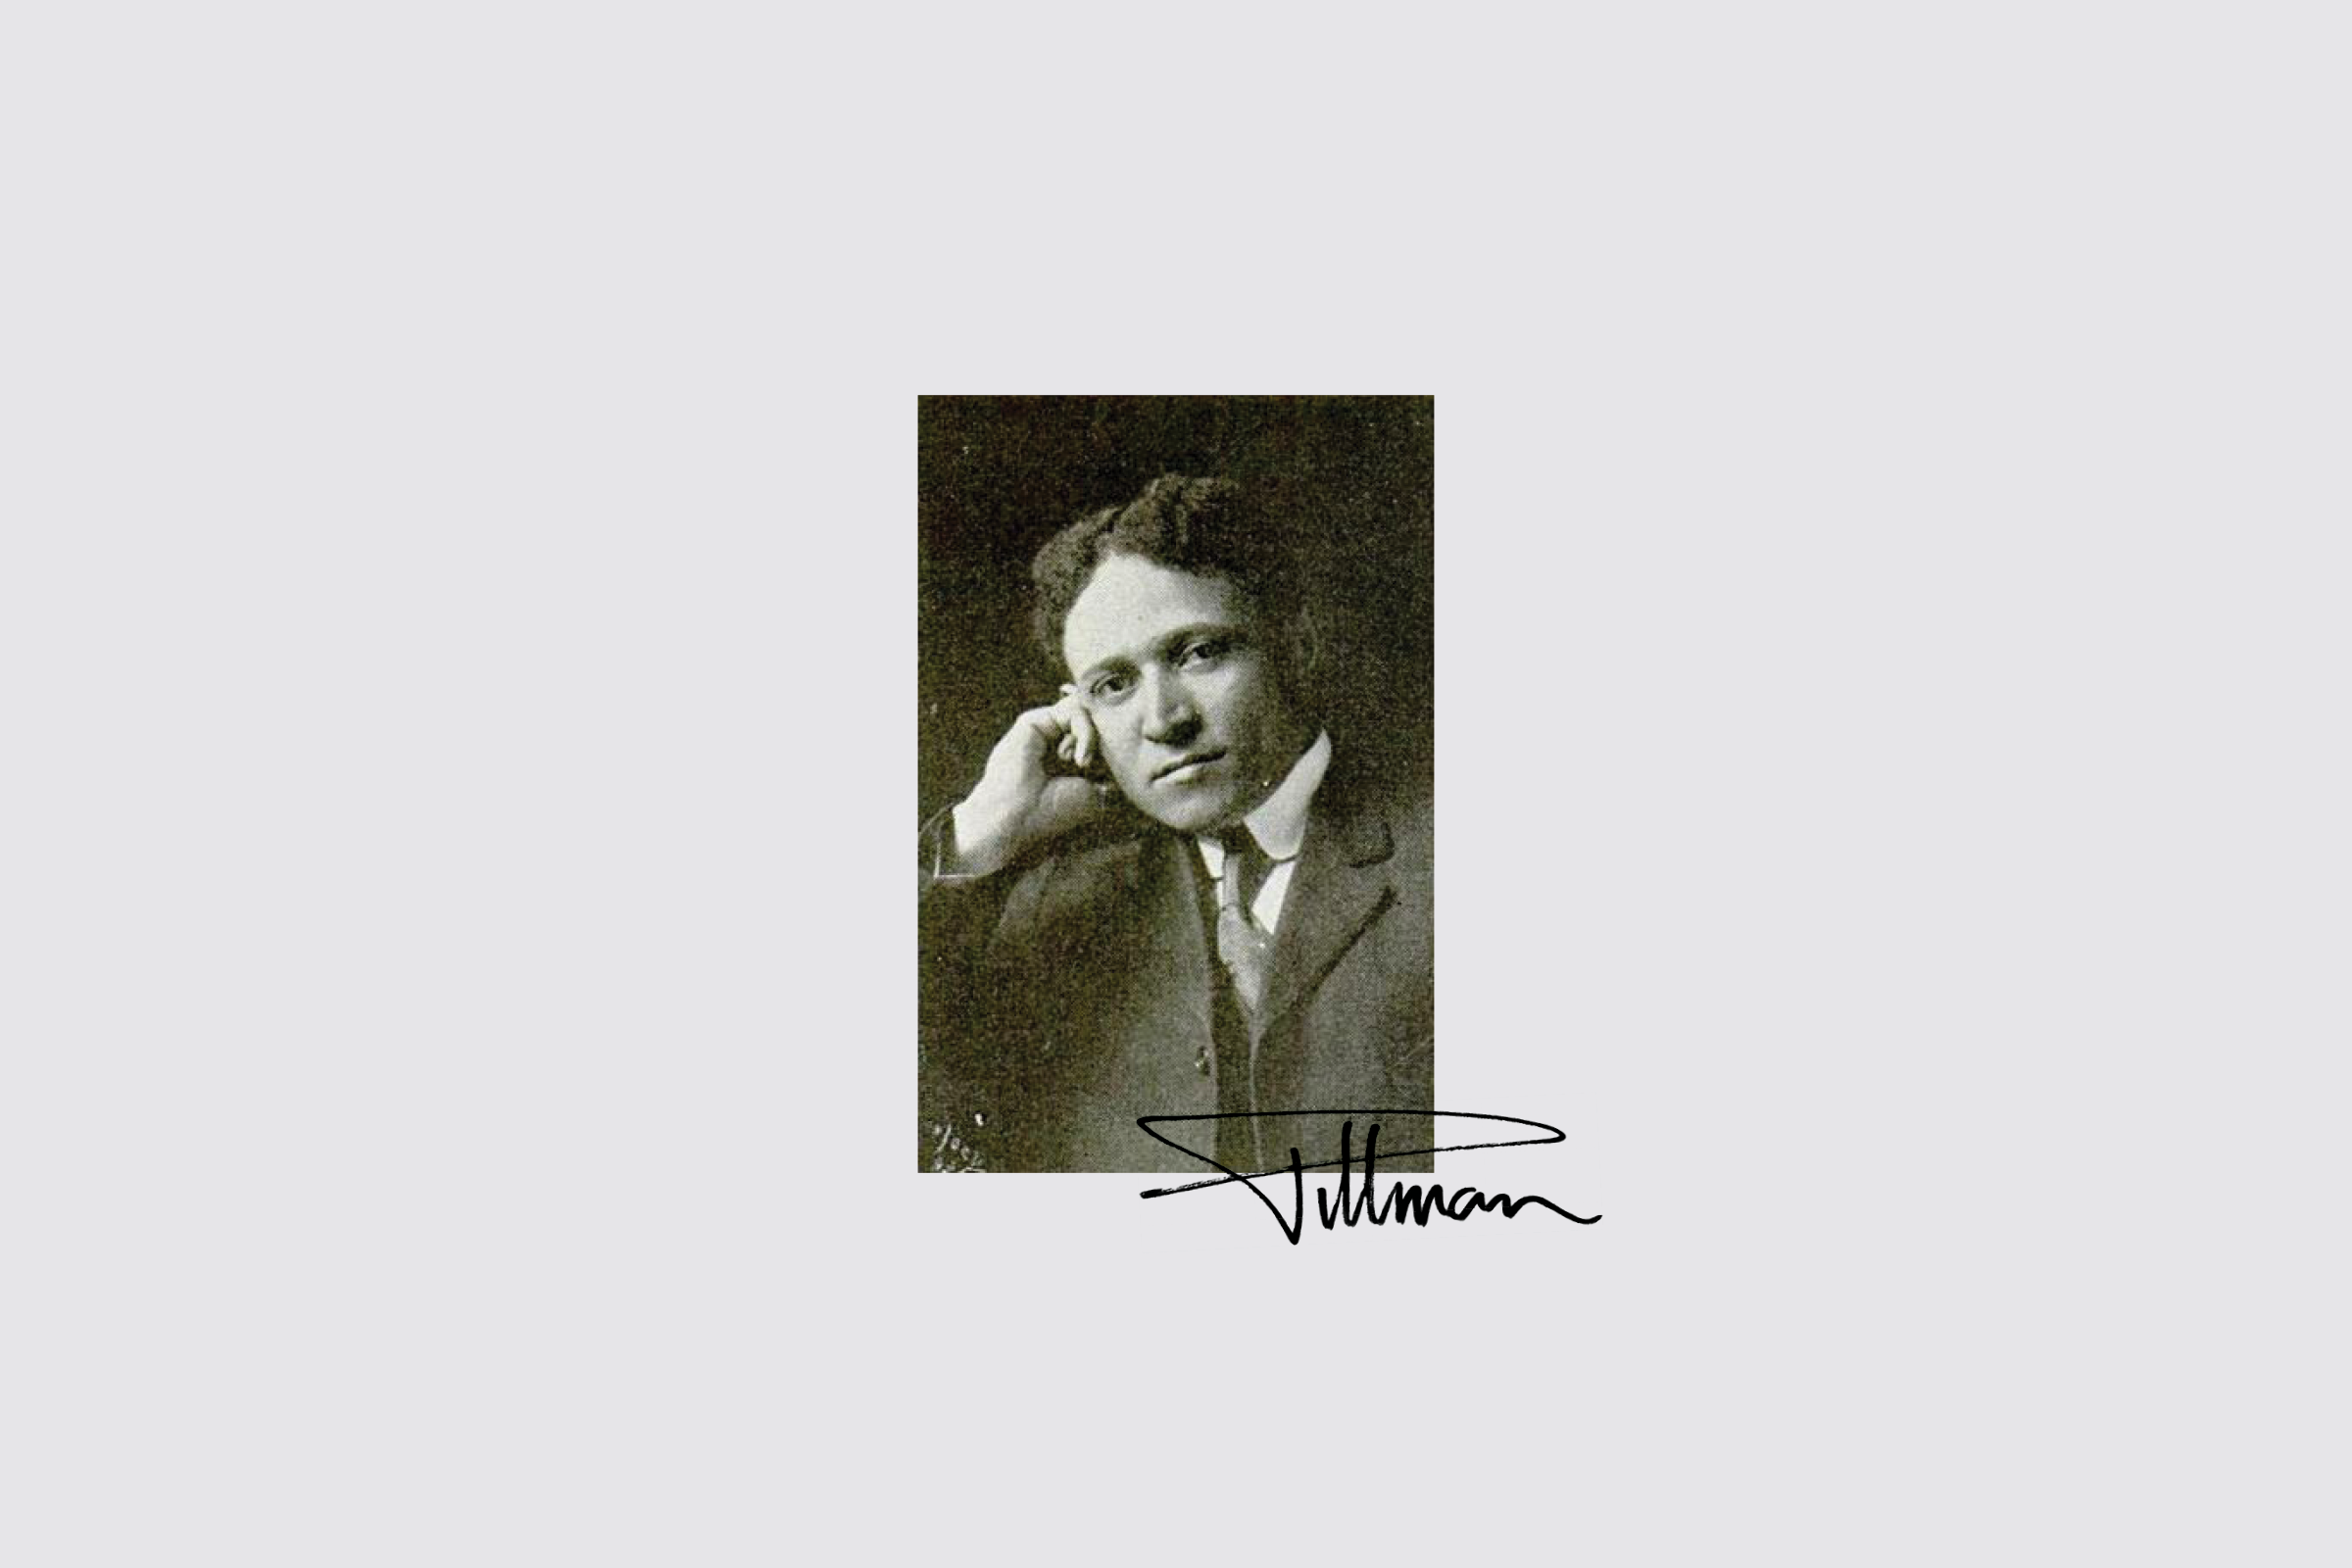 Photo of William Sidney Pittman against an off-white background